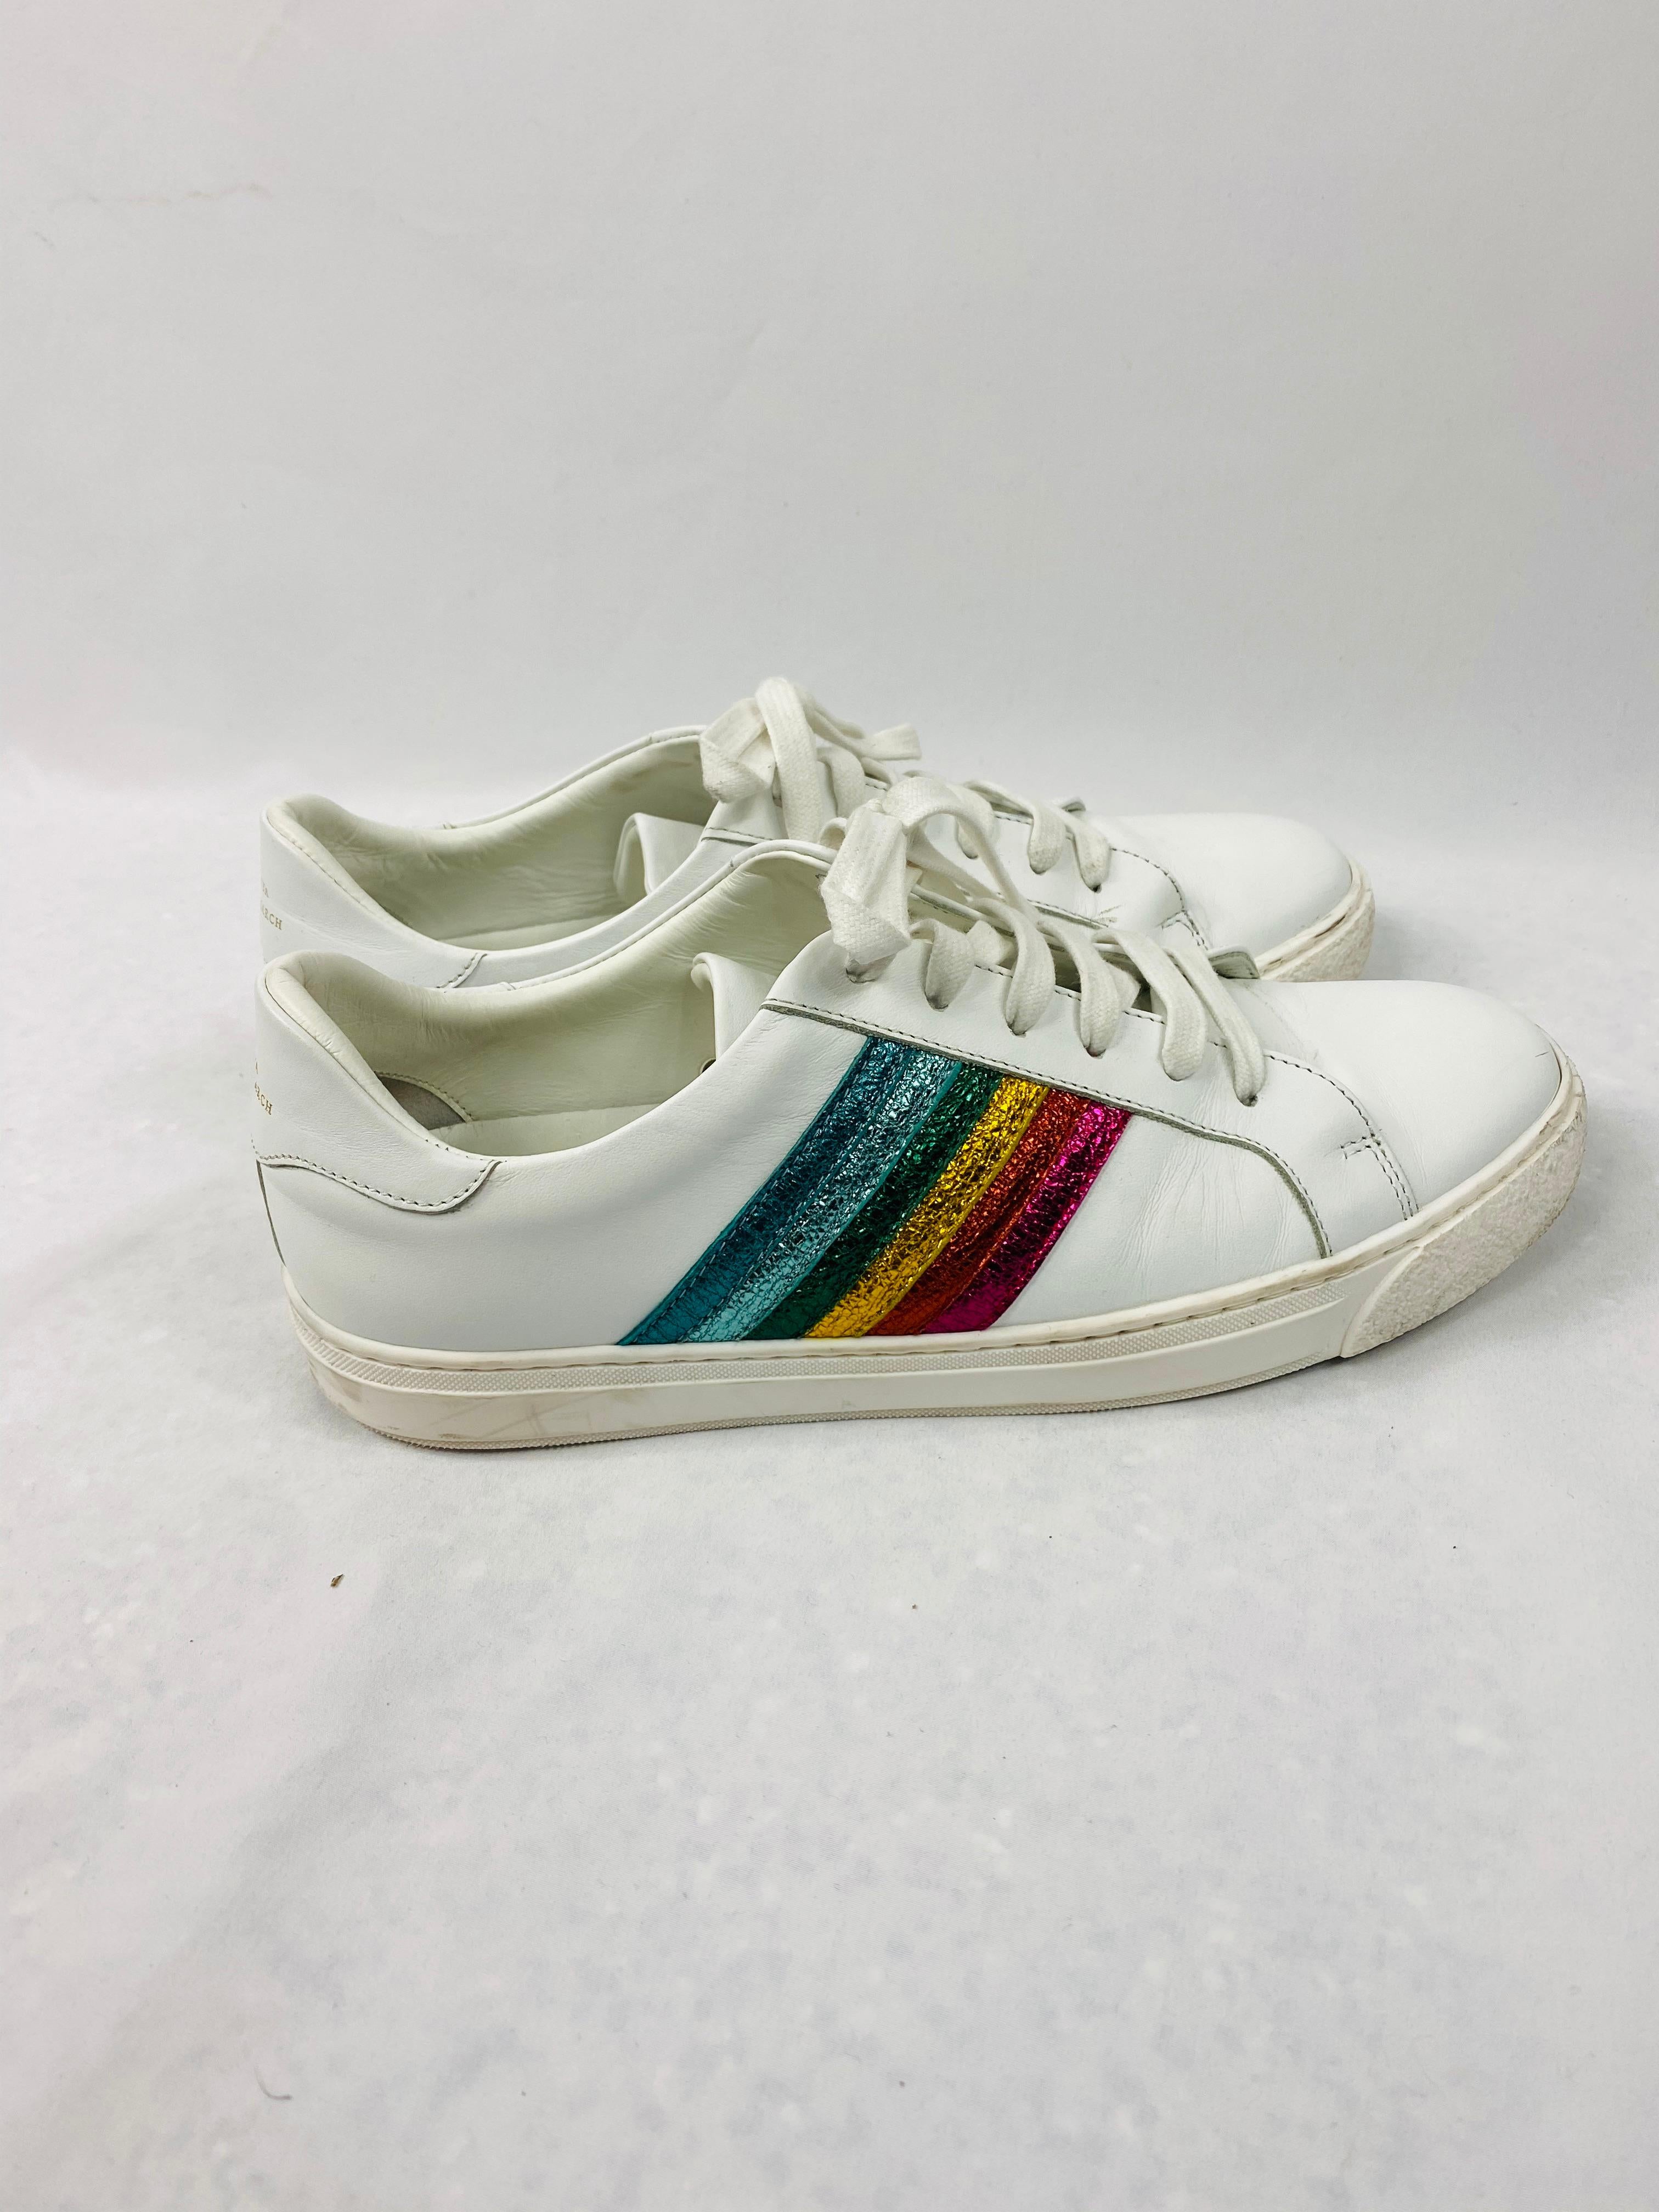 Women's or Men's Anya Hindmarch White Leather Sneakers Size 39 For Sale